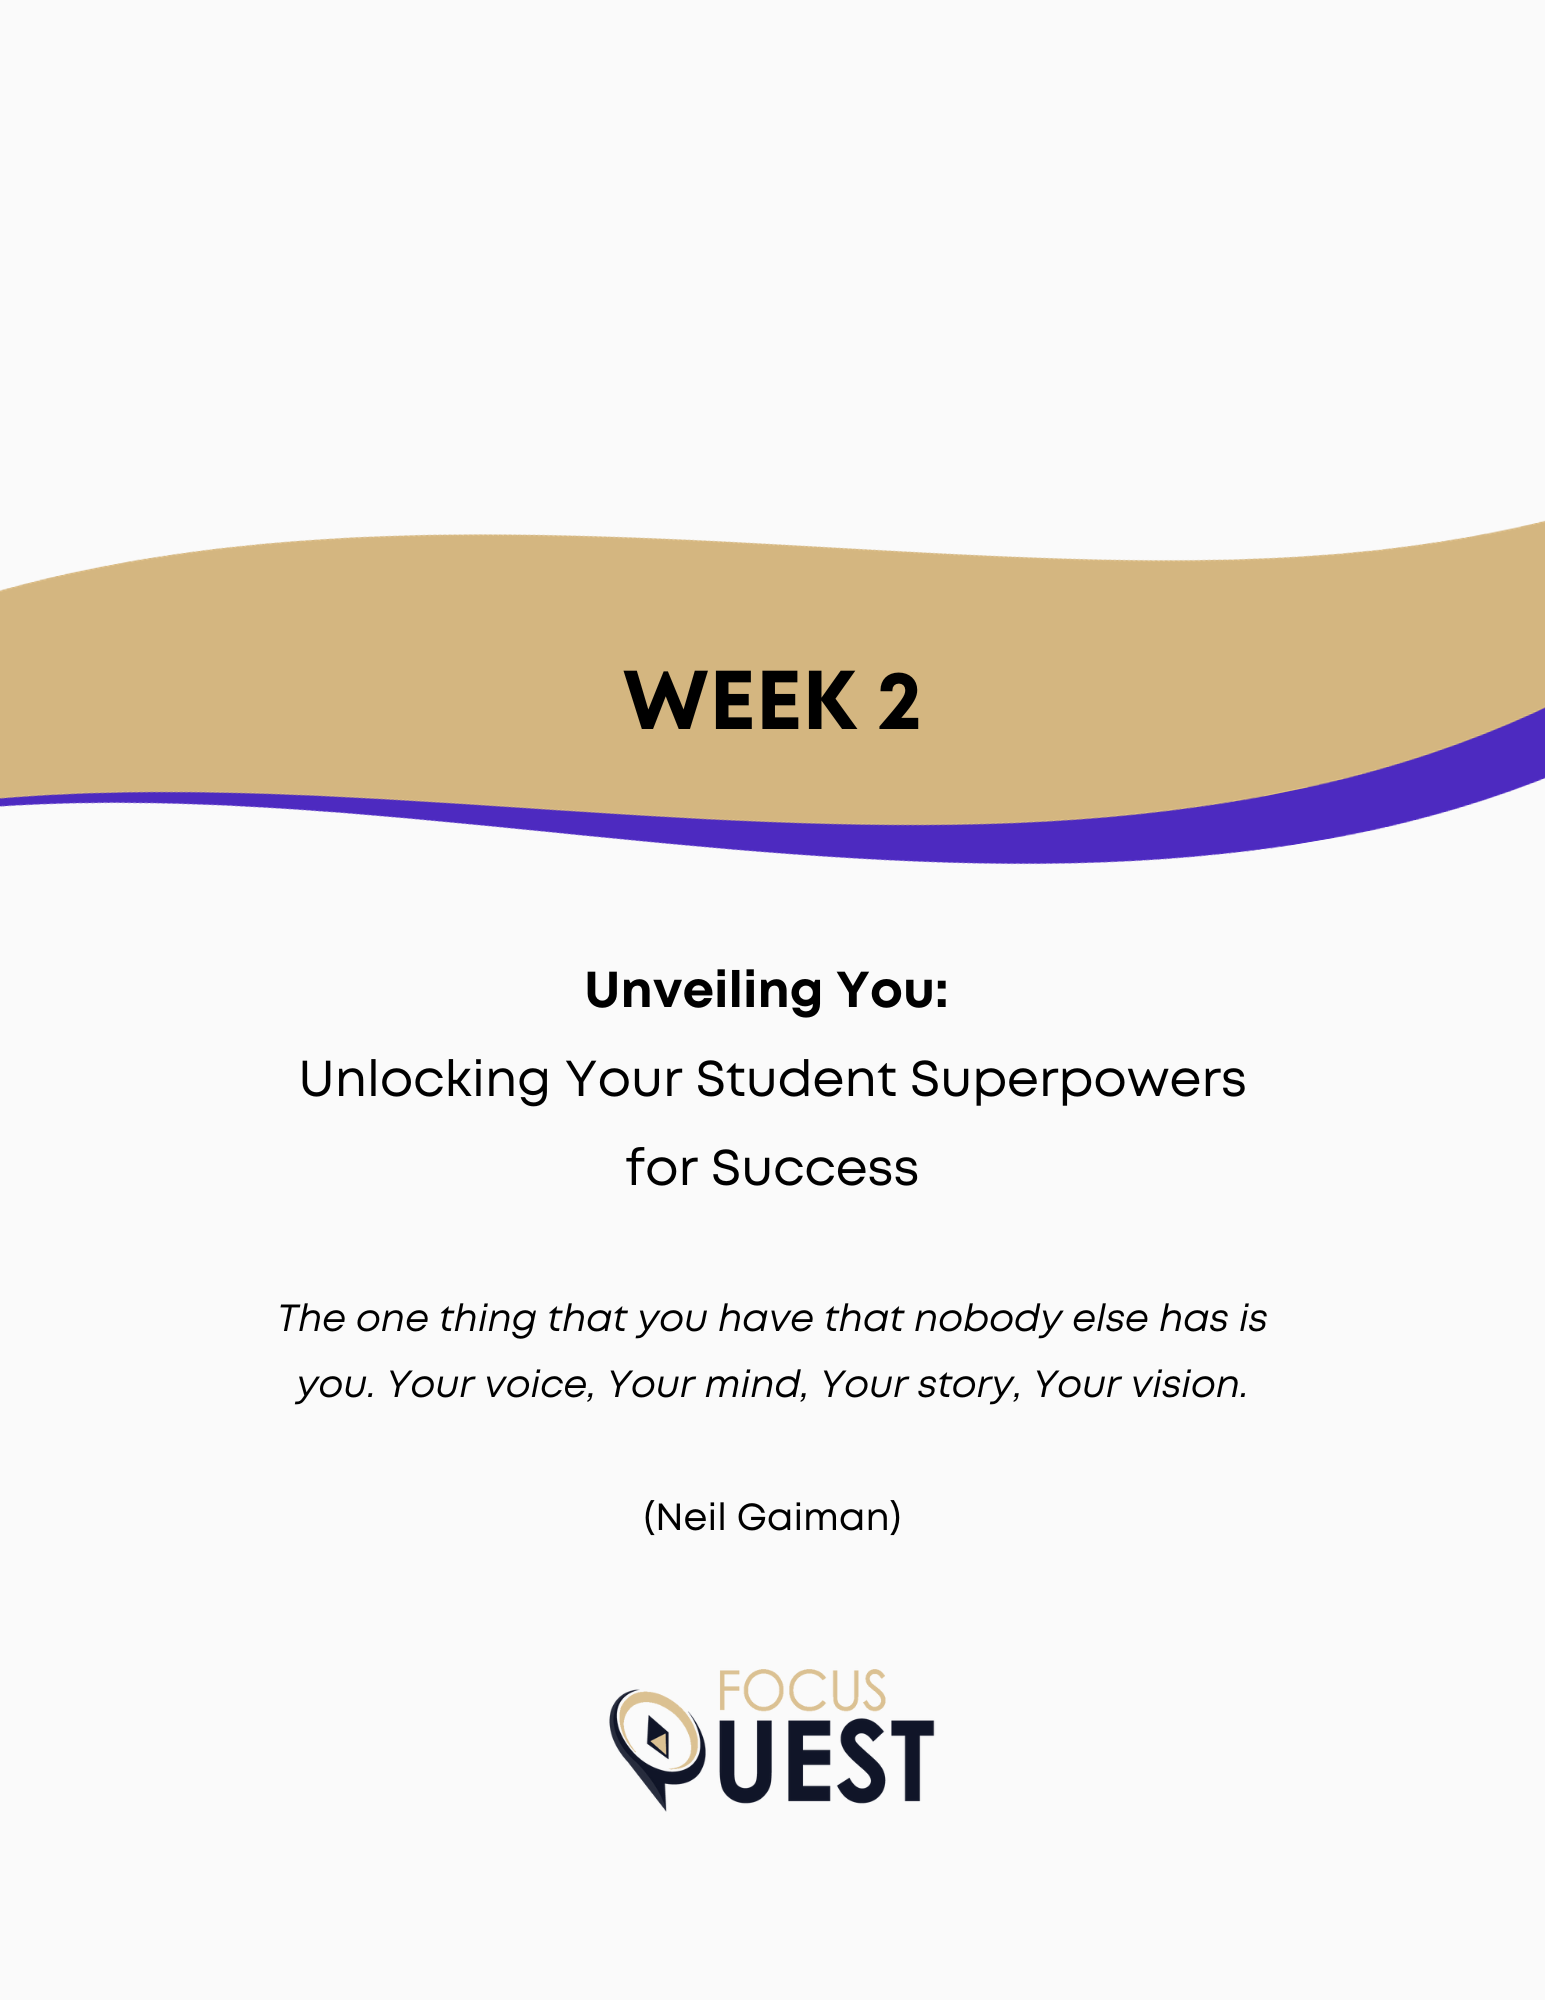 FocusQuest - Quest for Success Week 2 - Unveiling You: Unlocking Your Student Superpowers for Success